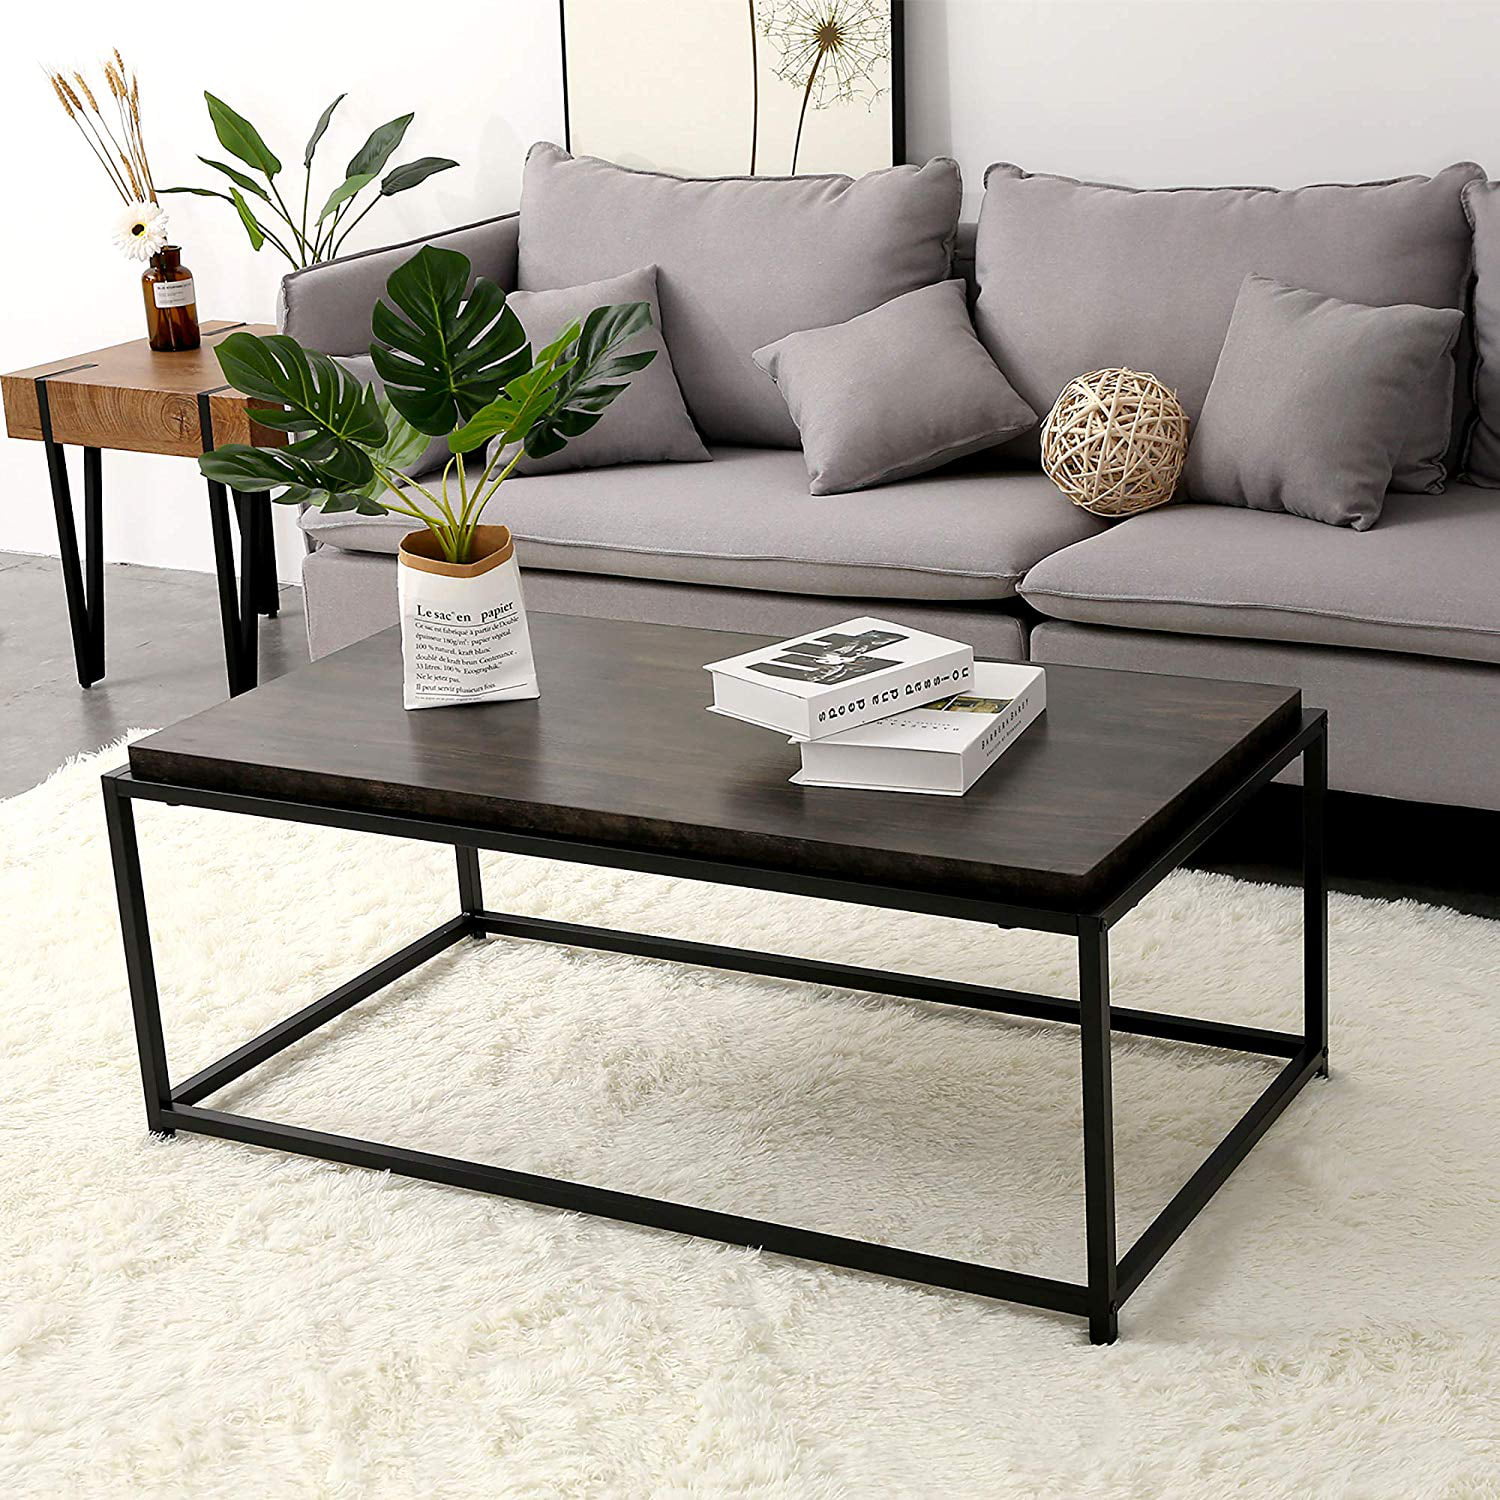 Ivinta Wood Coffee Table Modern Industrial Space Saving Couch Living ...